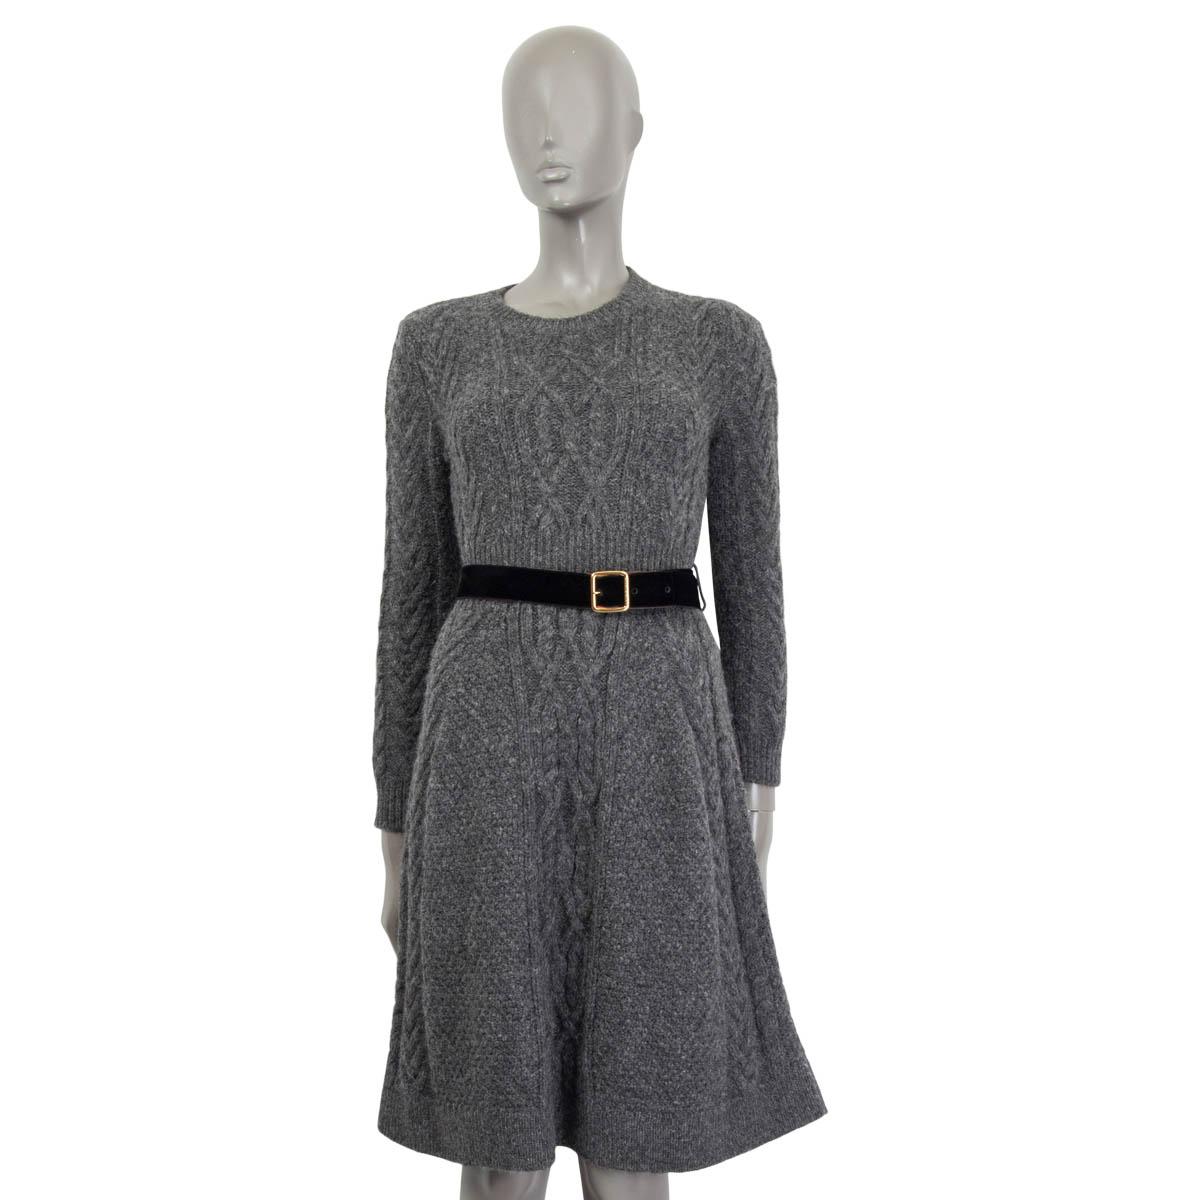 Black LOUIS VUITTON grey alpaca BELTED CHUNKY CABLE KNIT Dress S